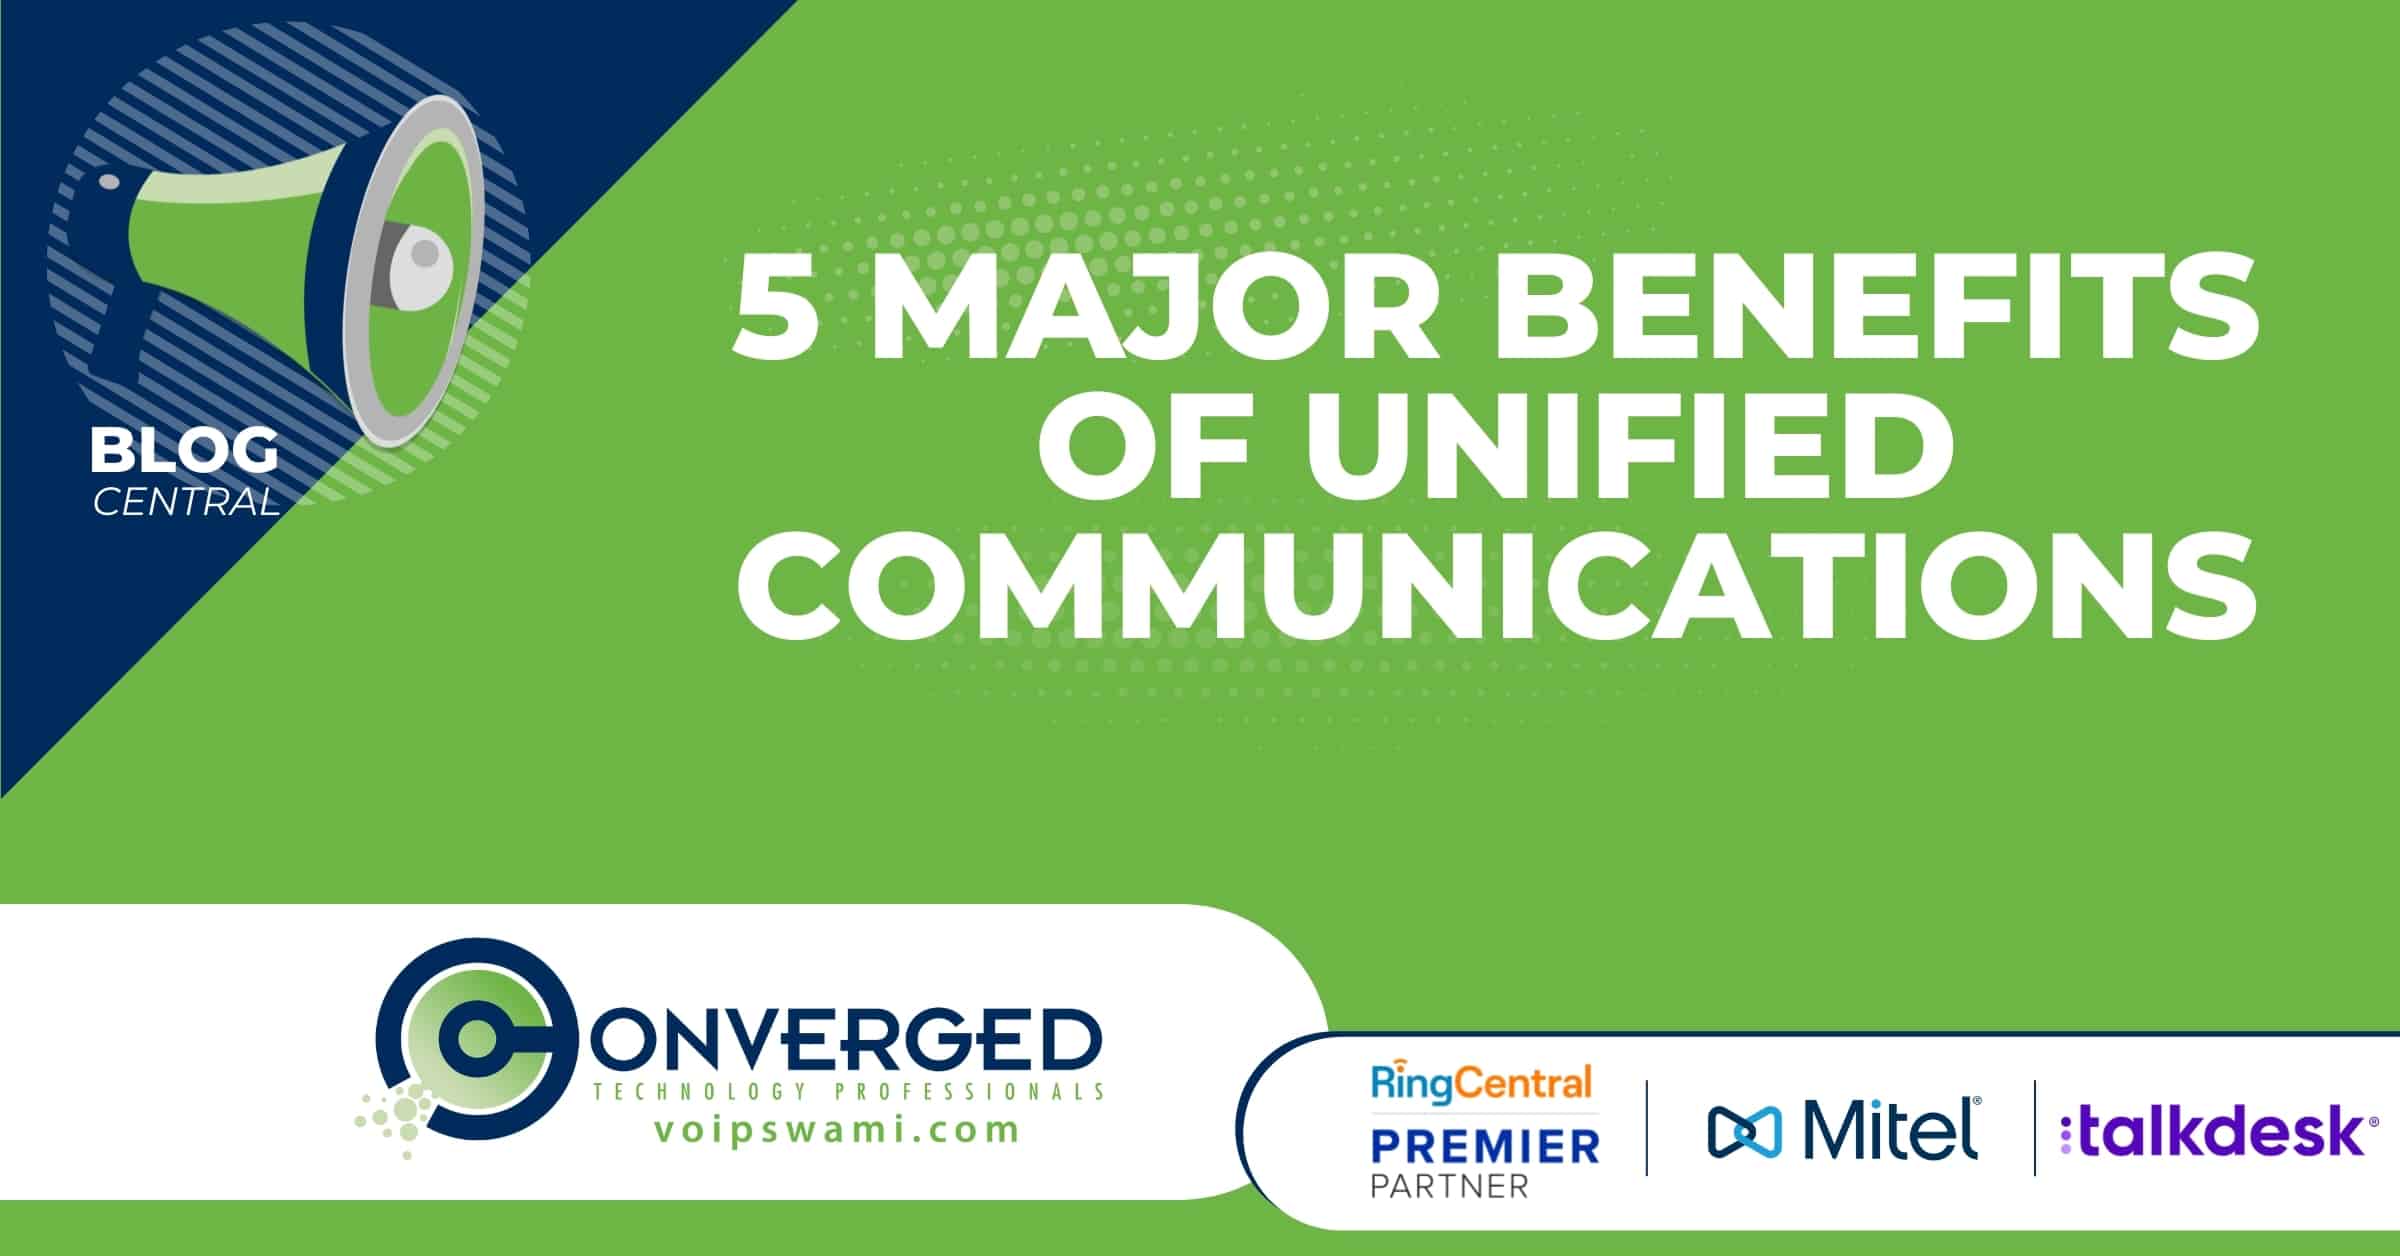 5 Major Benefits of Unified Communications